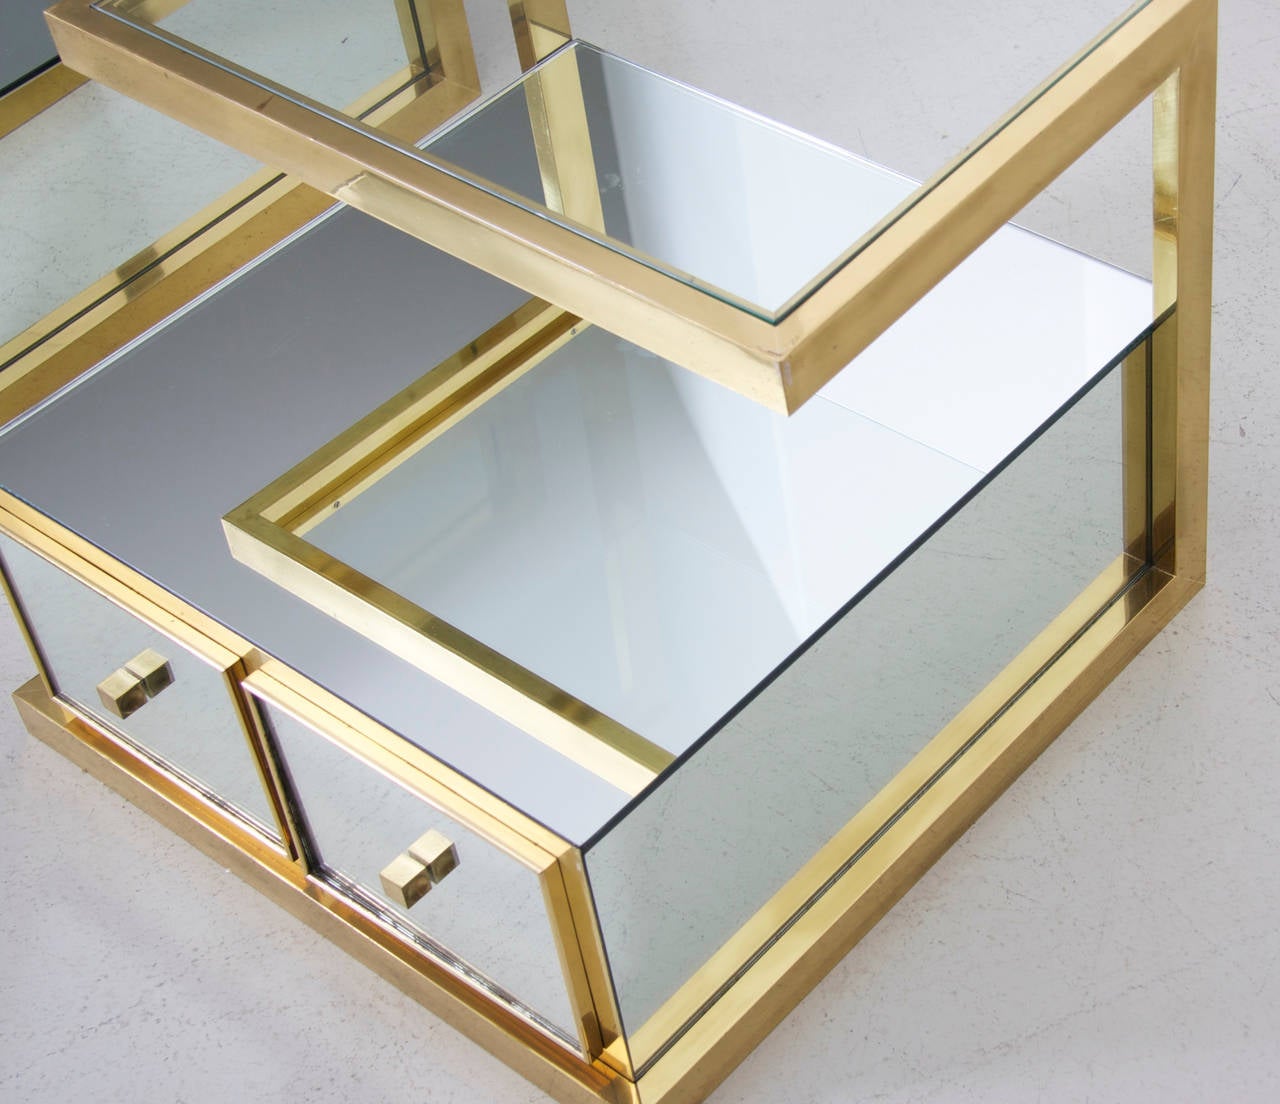 Very elegant, massive brass and mirror pair of bedside tables. Furniture of the French designer Michel Pigneres are very rare to find and really jewels. This pair of tables is in very good condition and brings the Hollywood Regency glamour in each